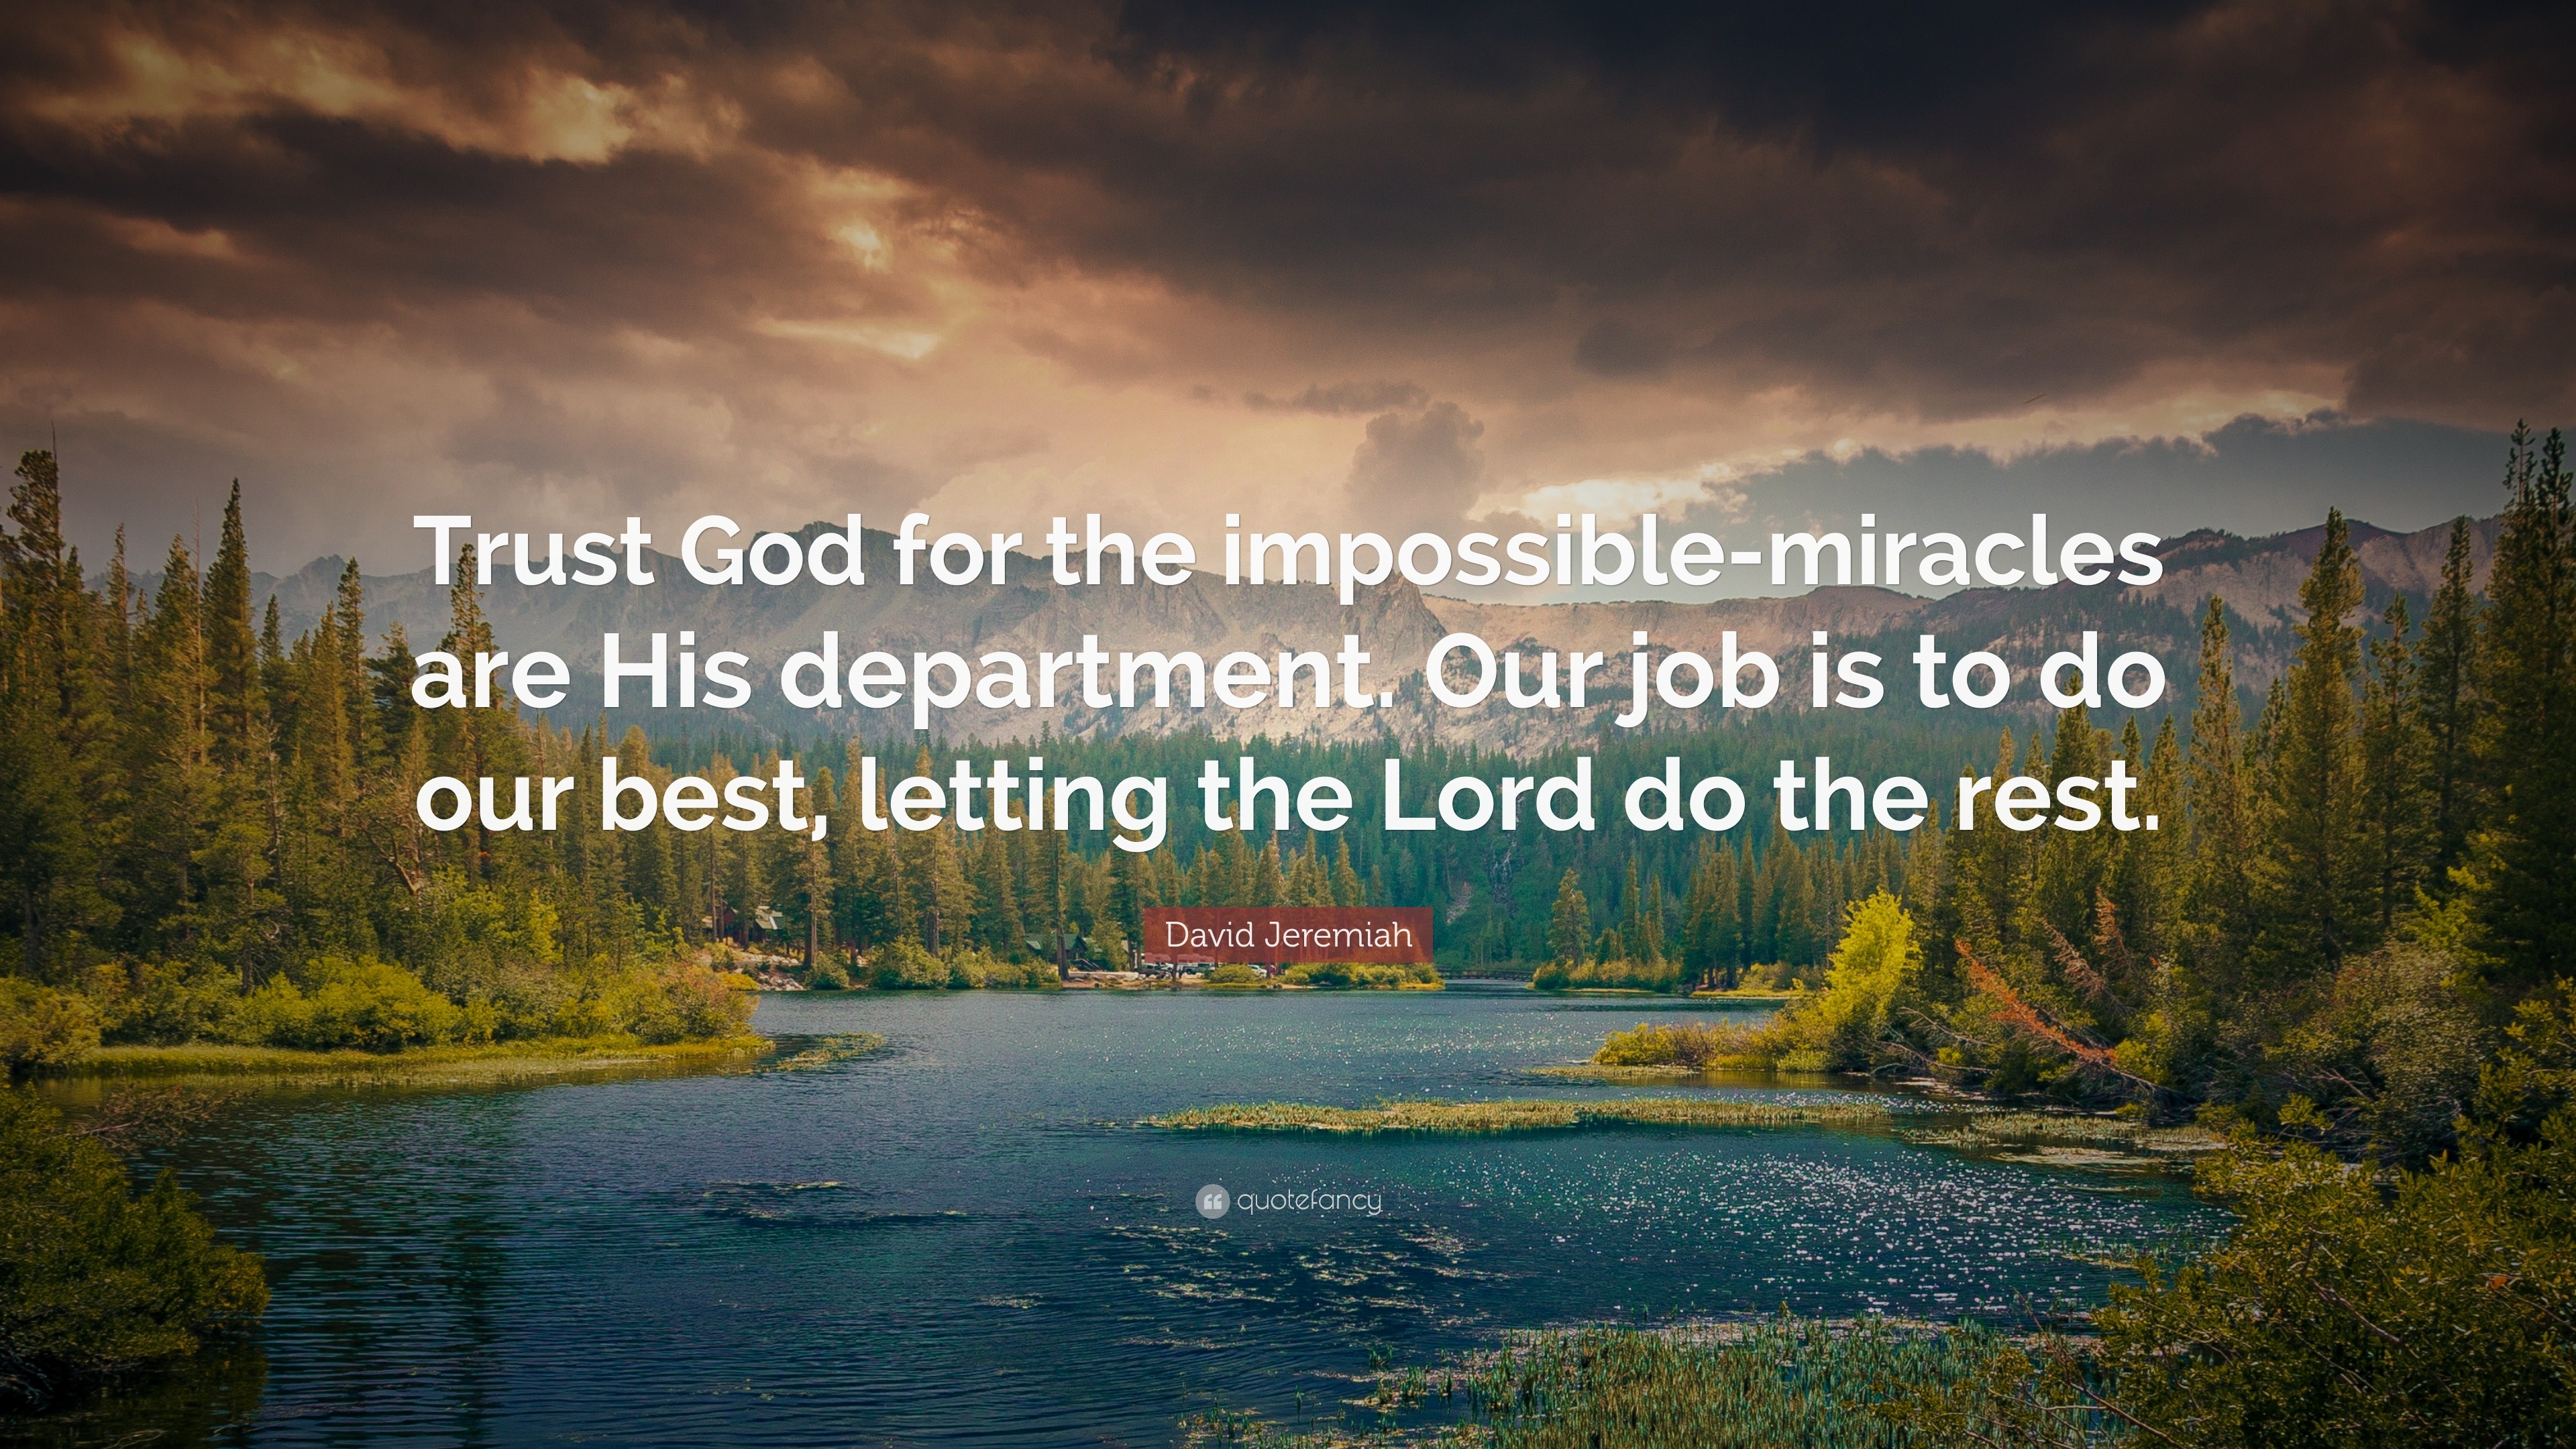 David Jeremiah Quote: “Trust God for the impossible-miracles are His